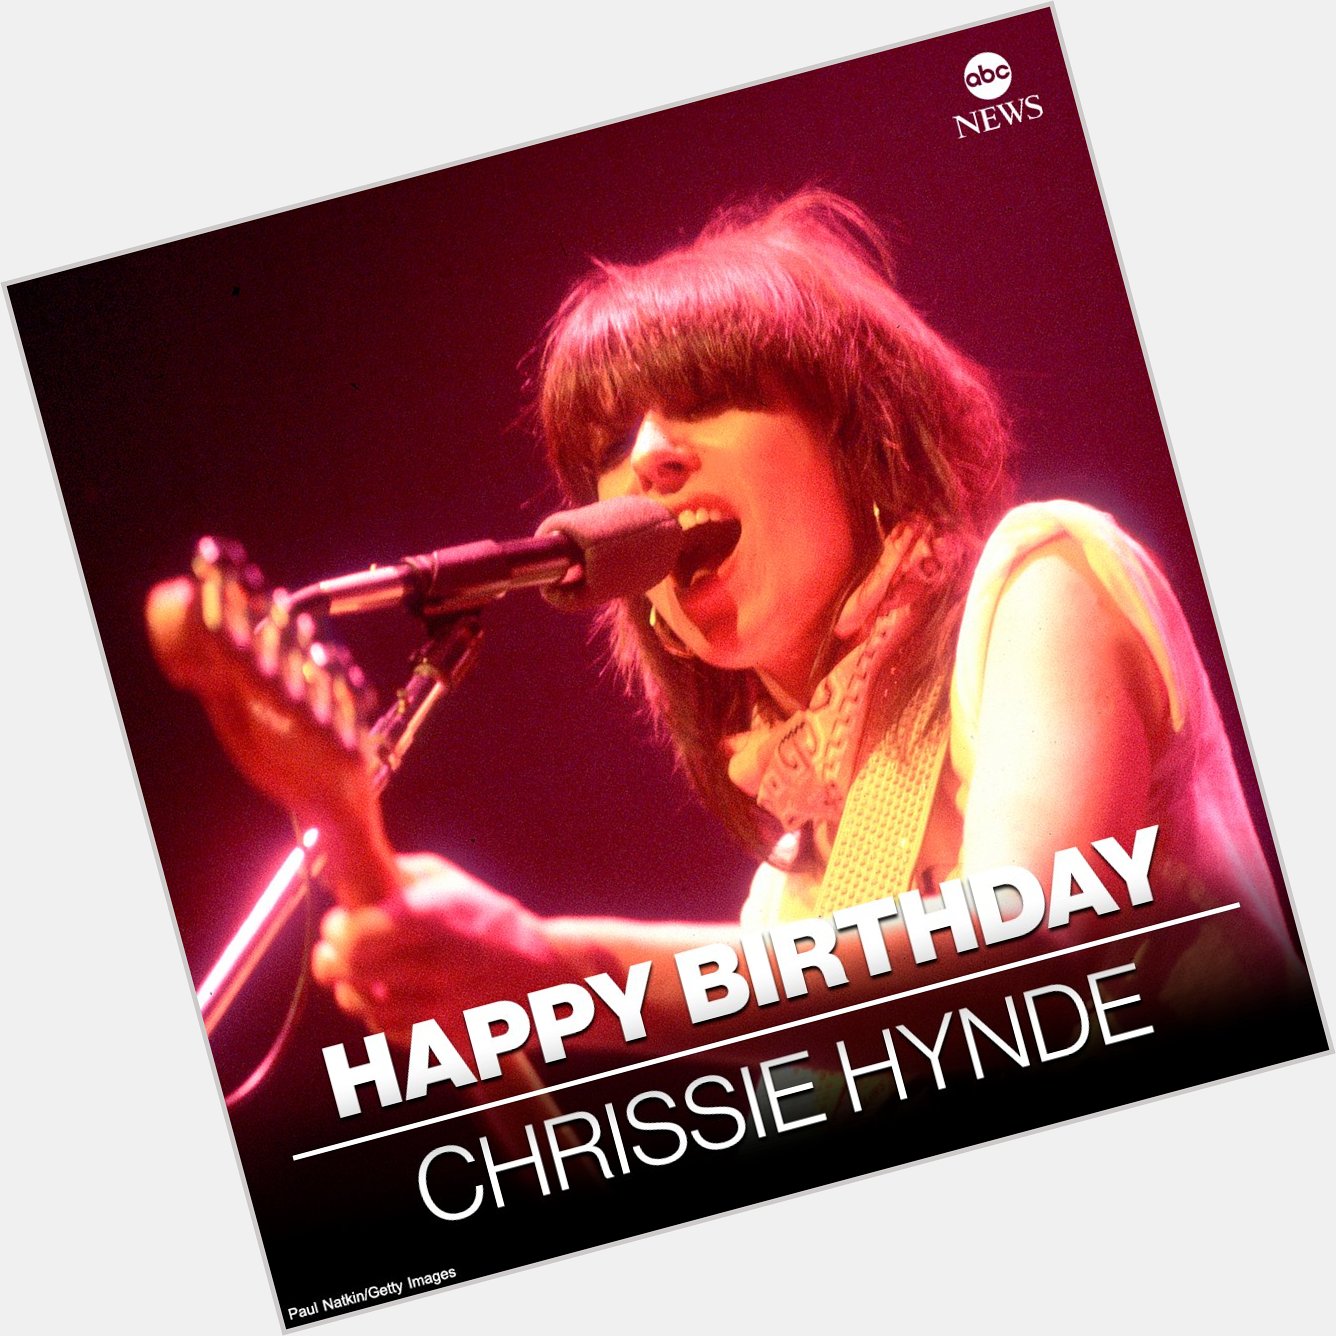 HAPPY BIRTHDAY: Rock singer Chrissie Hynde (The Pretenders) is 70 today.  